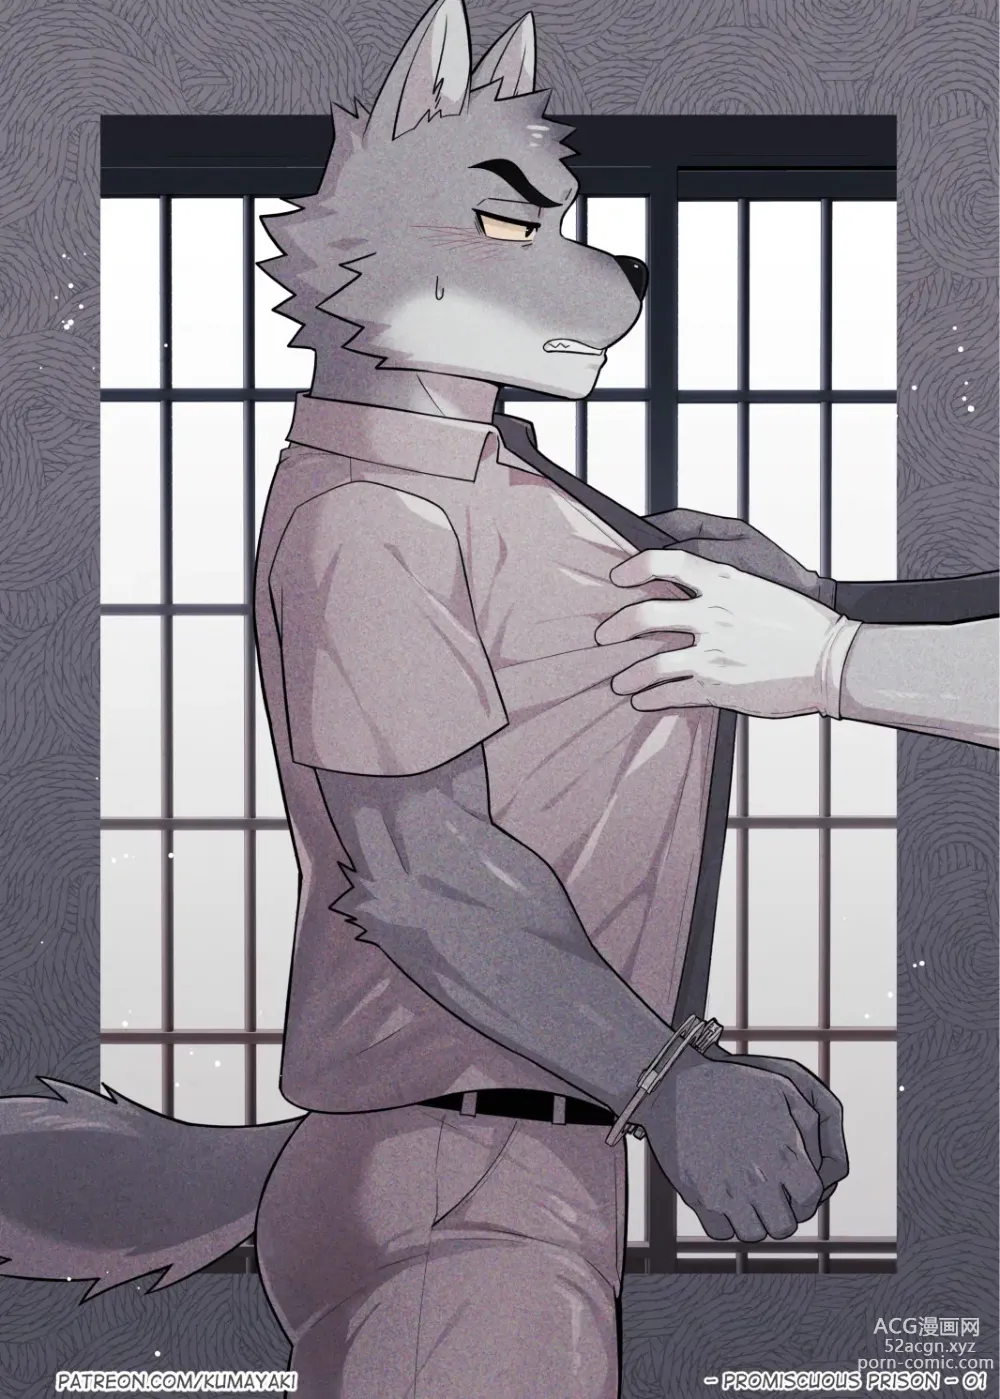 Page 3 of doujinshi Promiscuous Prison (uncensored)